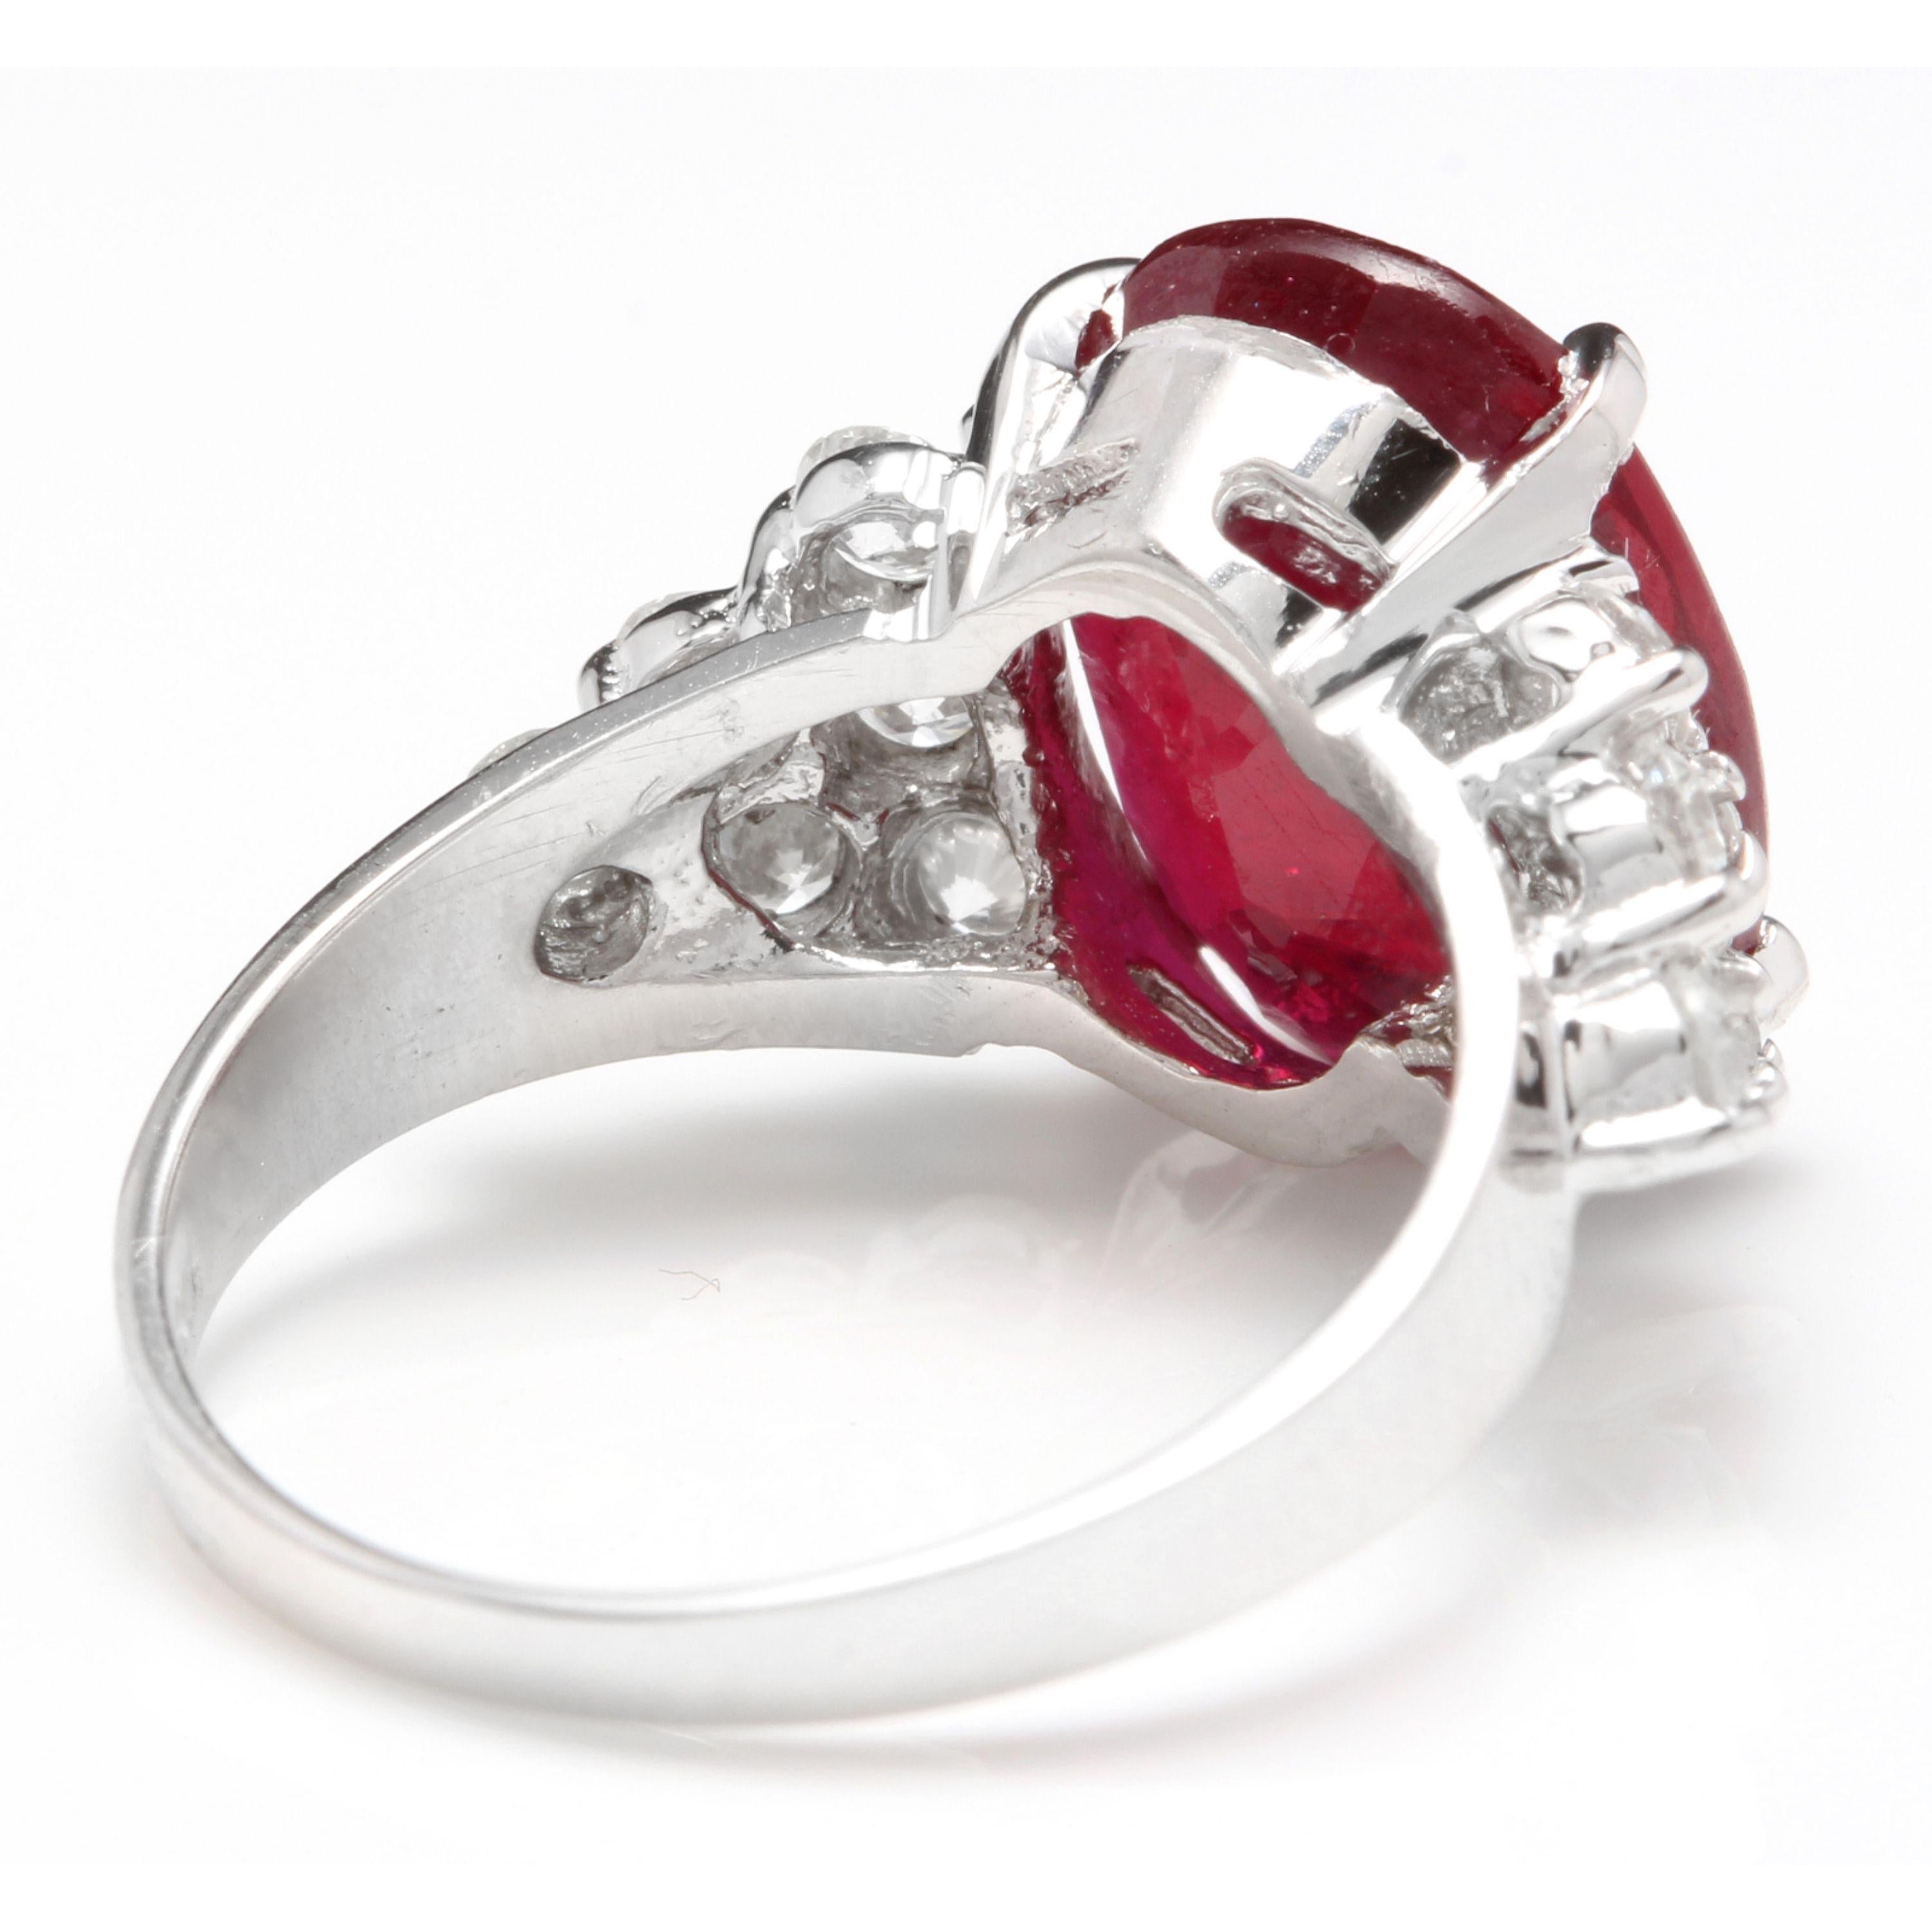 Mixed Cut 9.40 Carat Impressive Red Ruby and Natural Diamond 14 Karat White Gold Ring For Sale